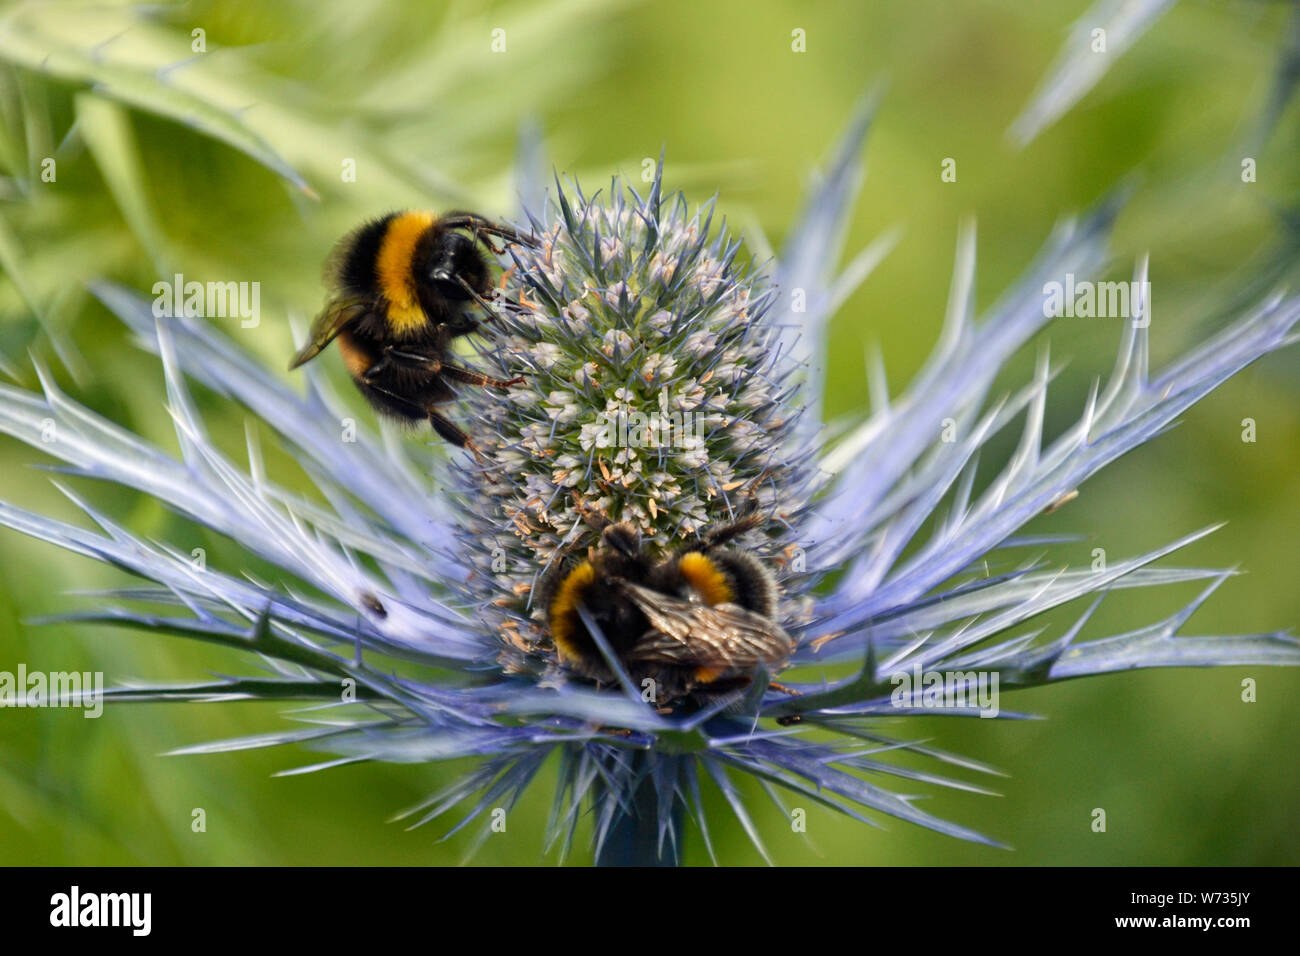 Bumble bees on a flower in an English Country Garden, UK Stock Photo